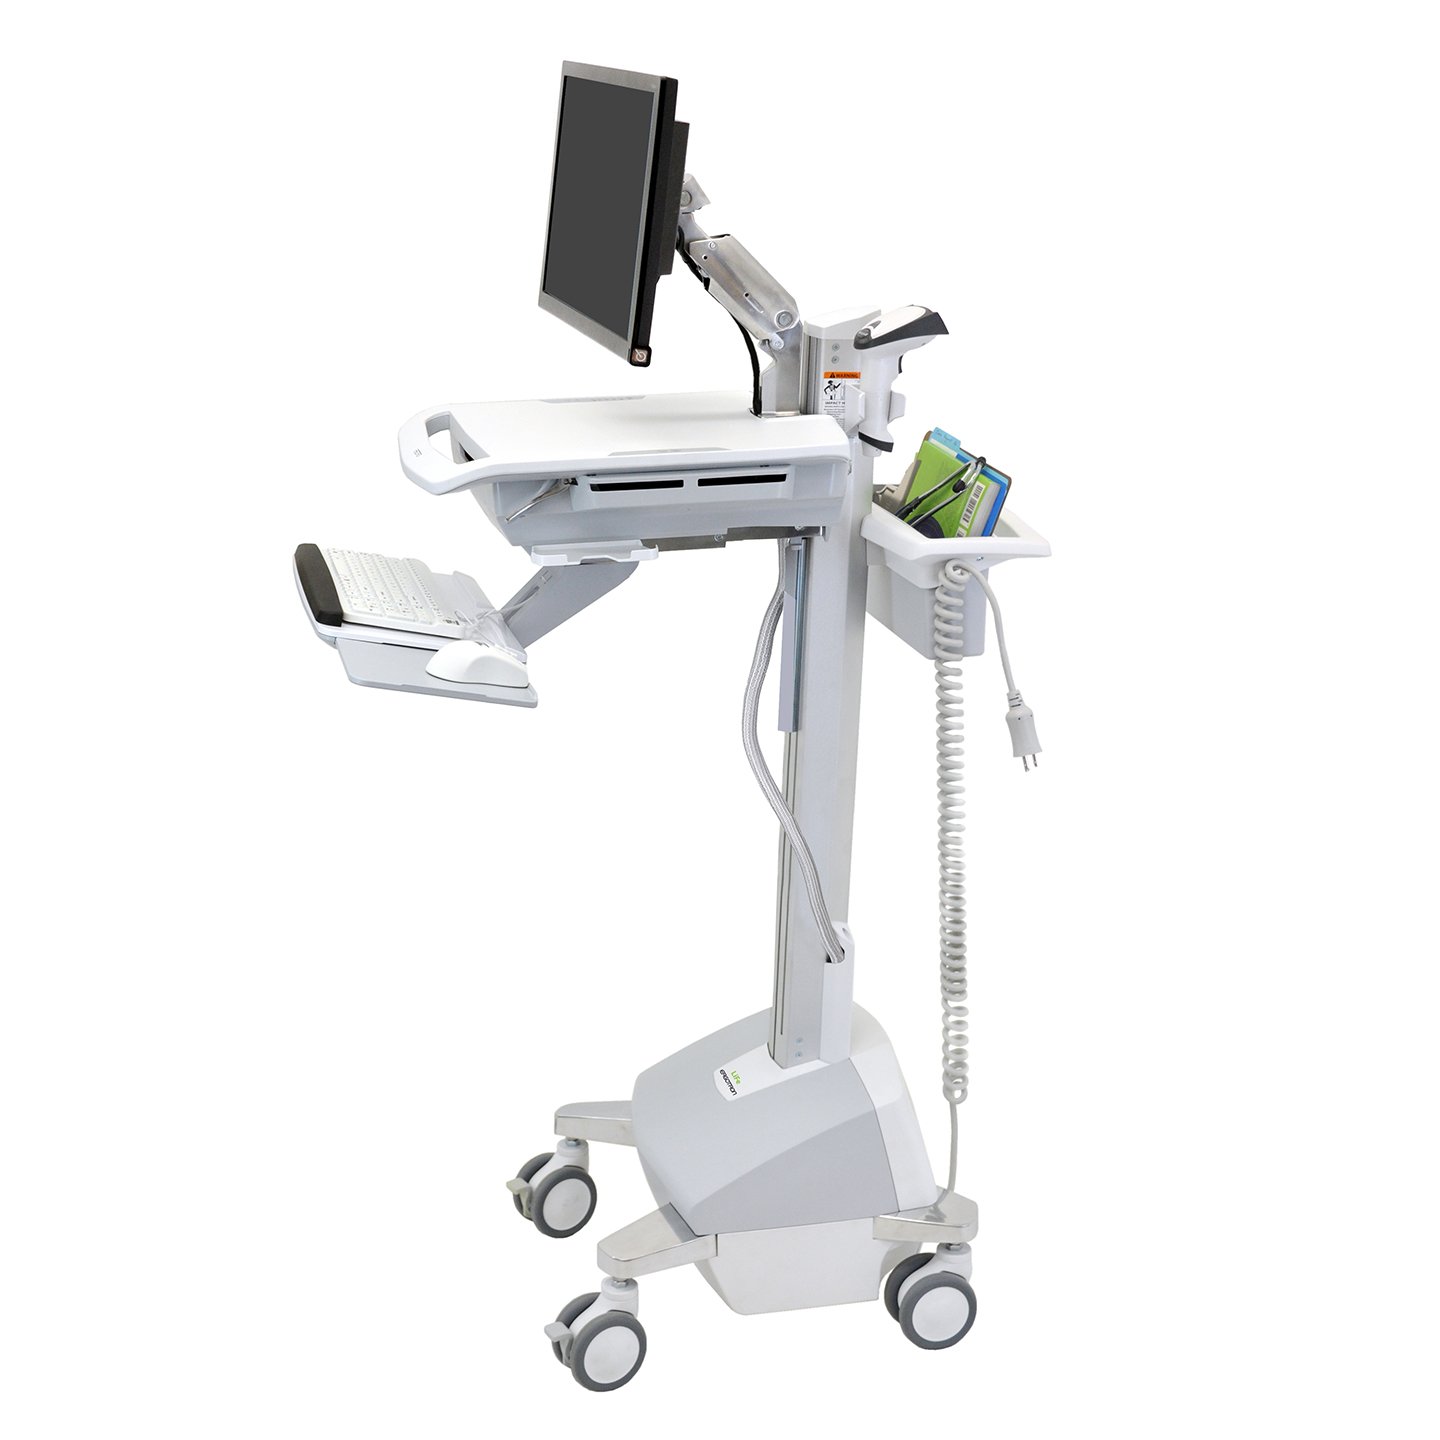 Haworth StyleView Powered Medical Cart Accessories in white and adjustable height with wheels with notebooks in it and monitor attached